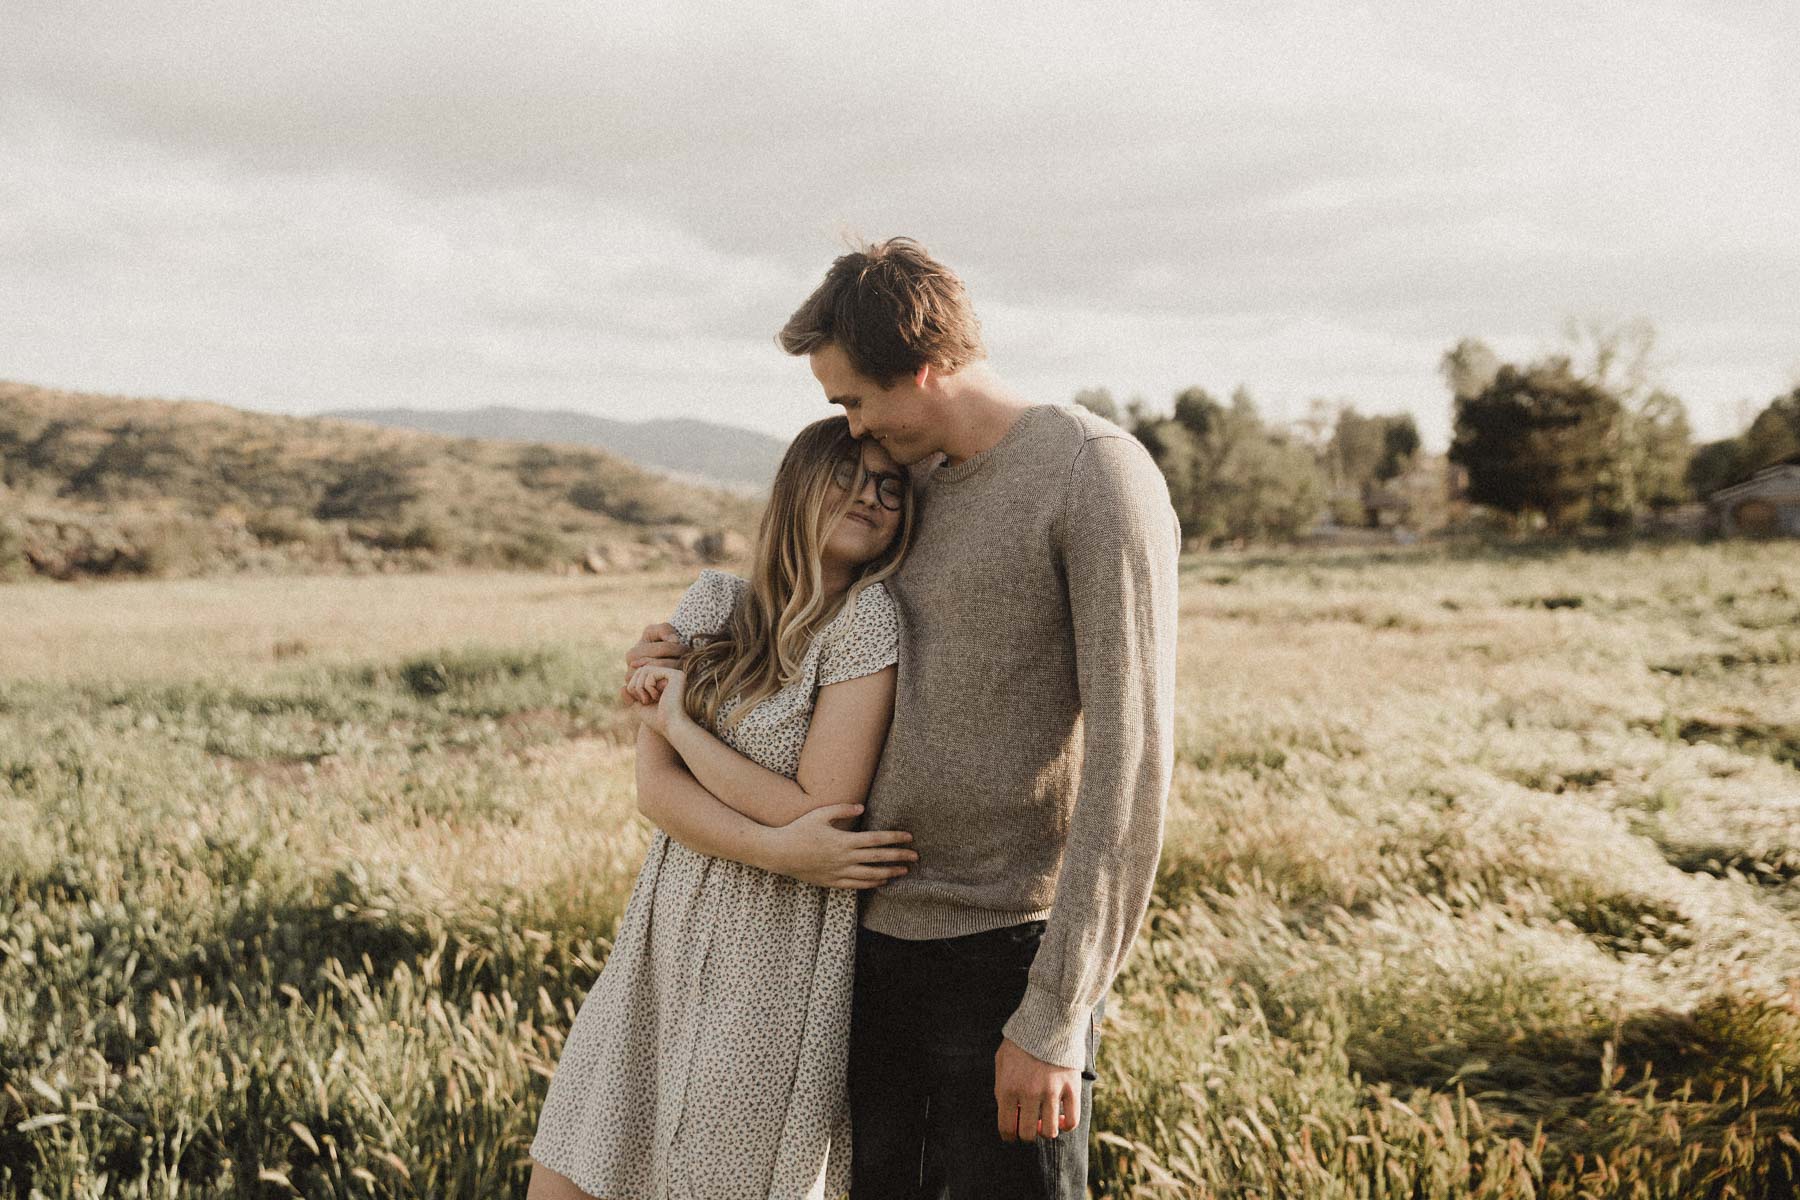 Why You Shouldn’t Feel Bad About Being in a Boring Relationship